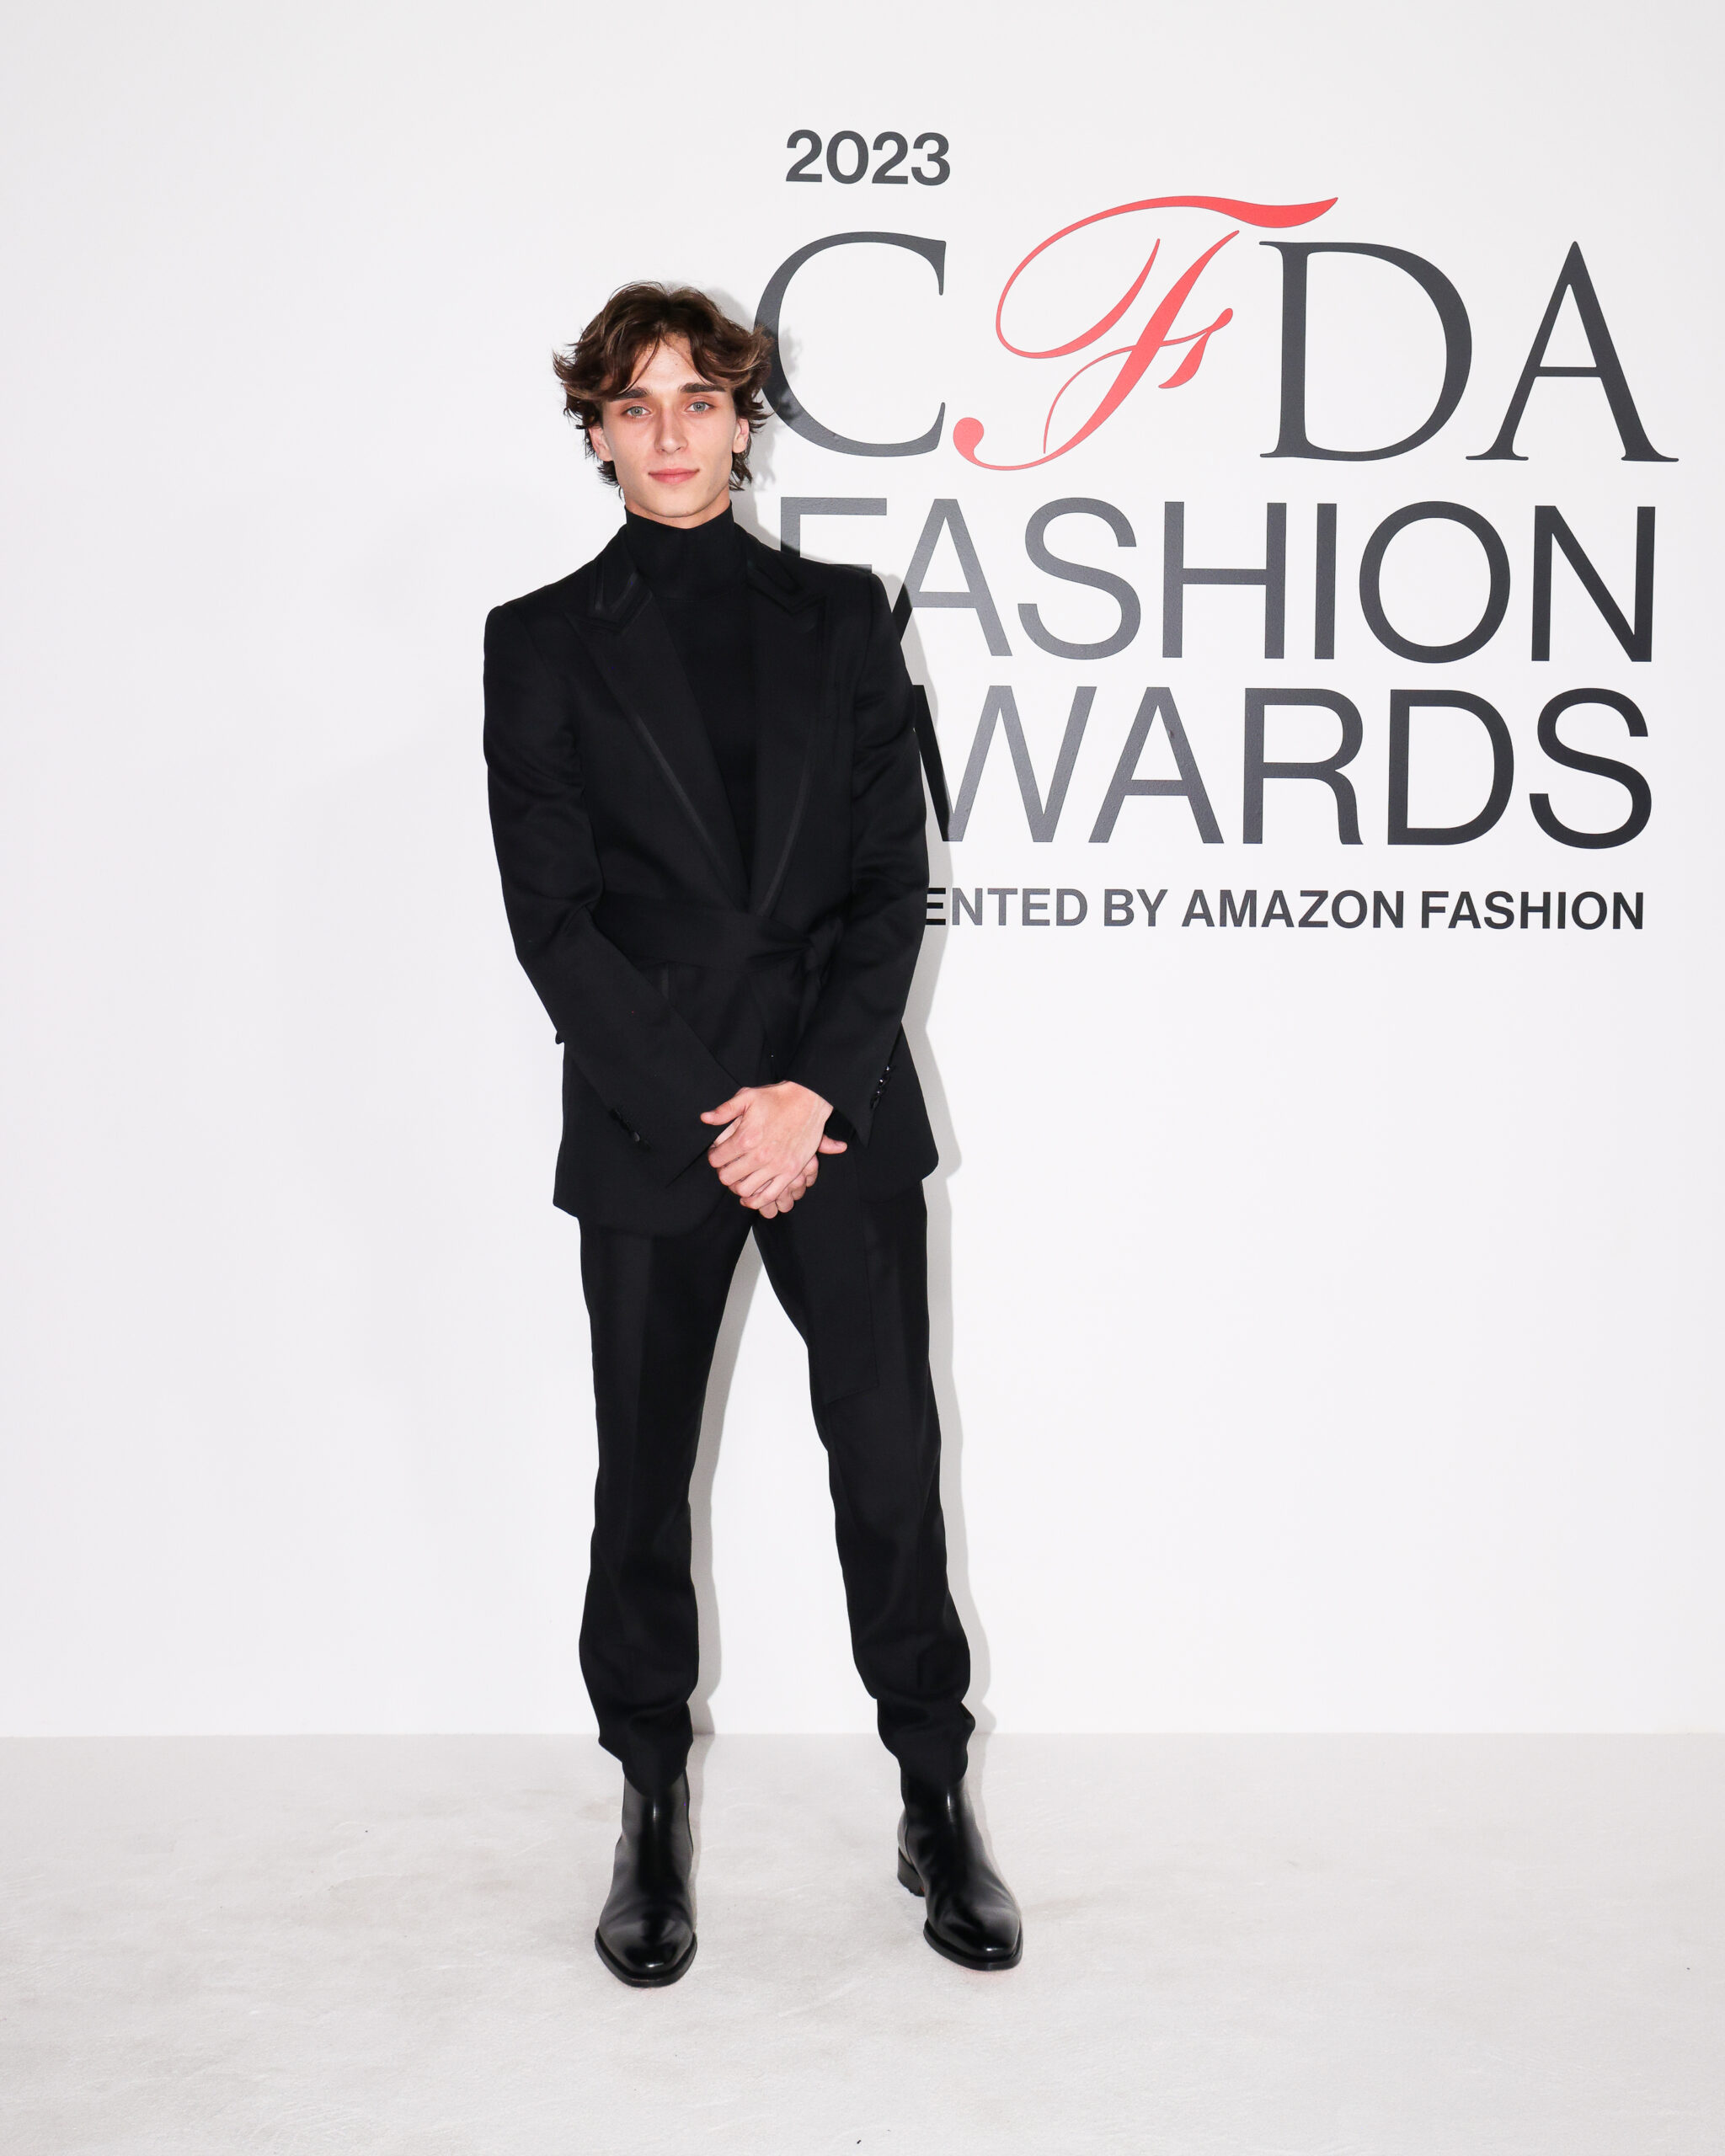 Josh Richards exudes effortless style at the 2023 CFDA Awards in a sleek black Dolce &amp; Gabbana suit with satin detailing, paired with heeled Chelsea boots.